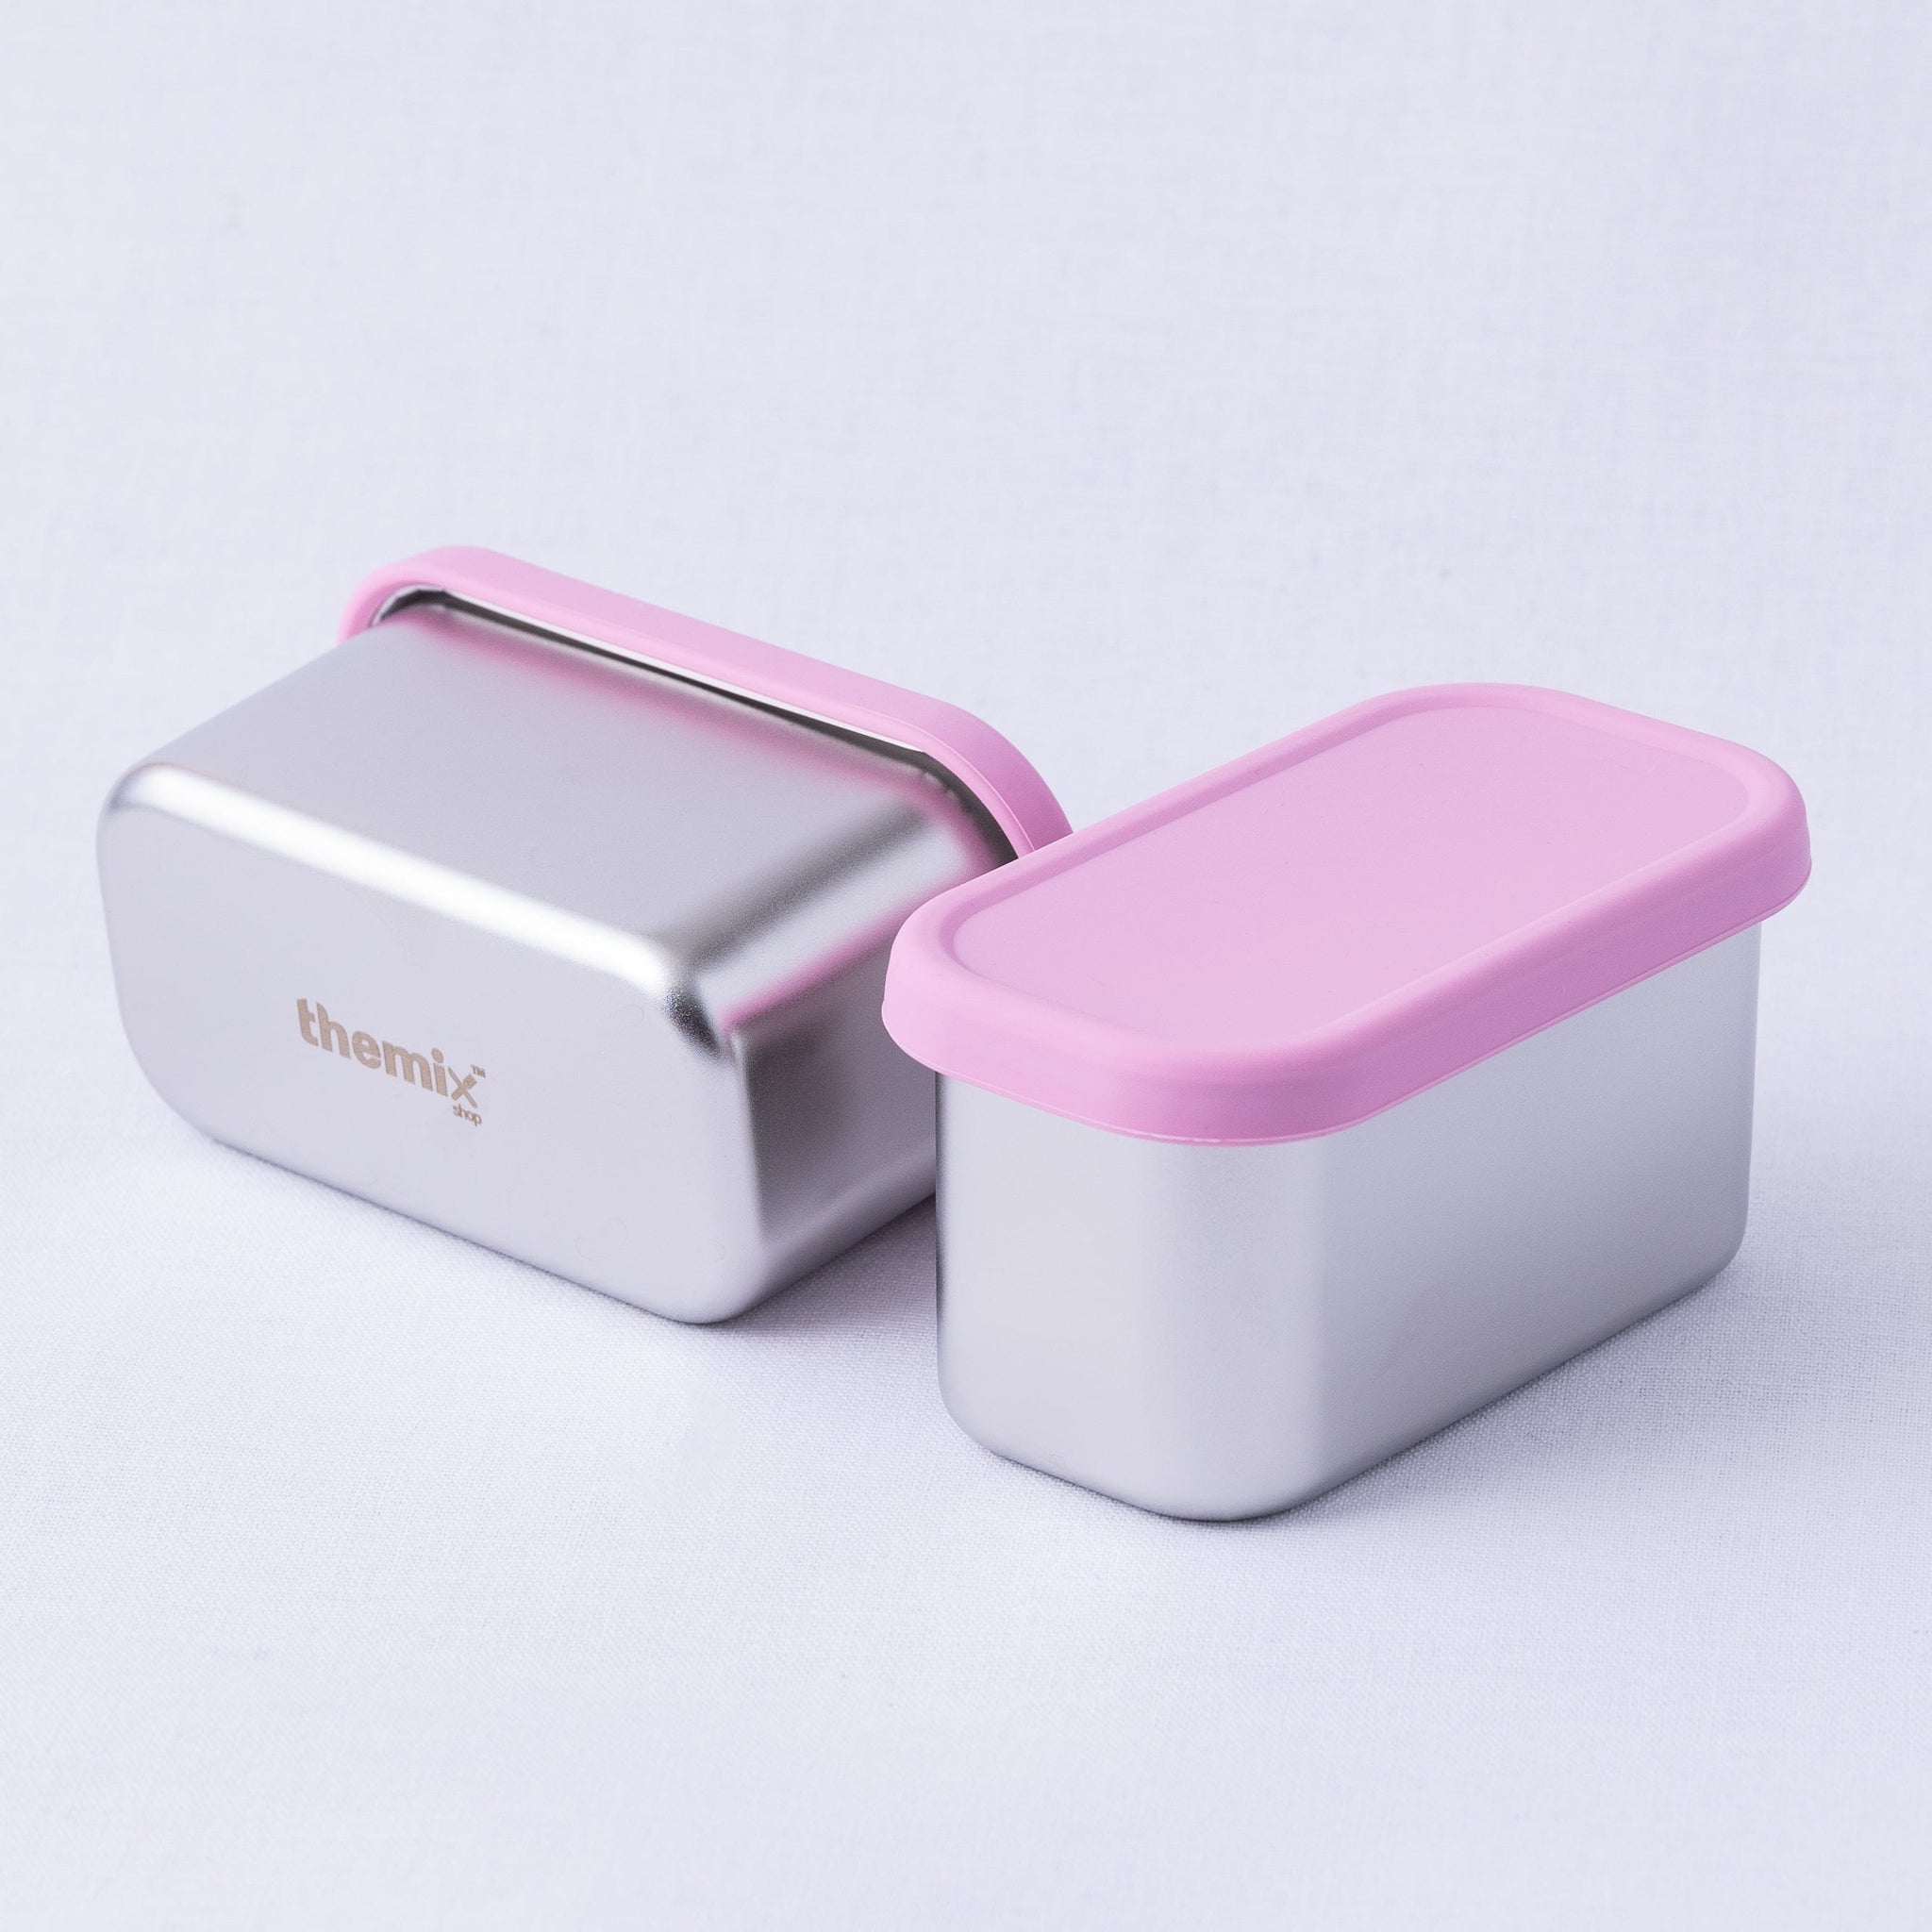 TheMix Shop Food Storage Pink TheMix Bento Box Lunchbox Containers (Set of 2)